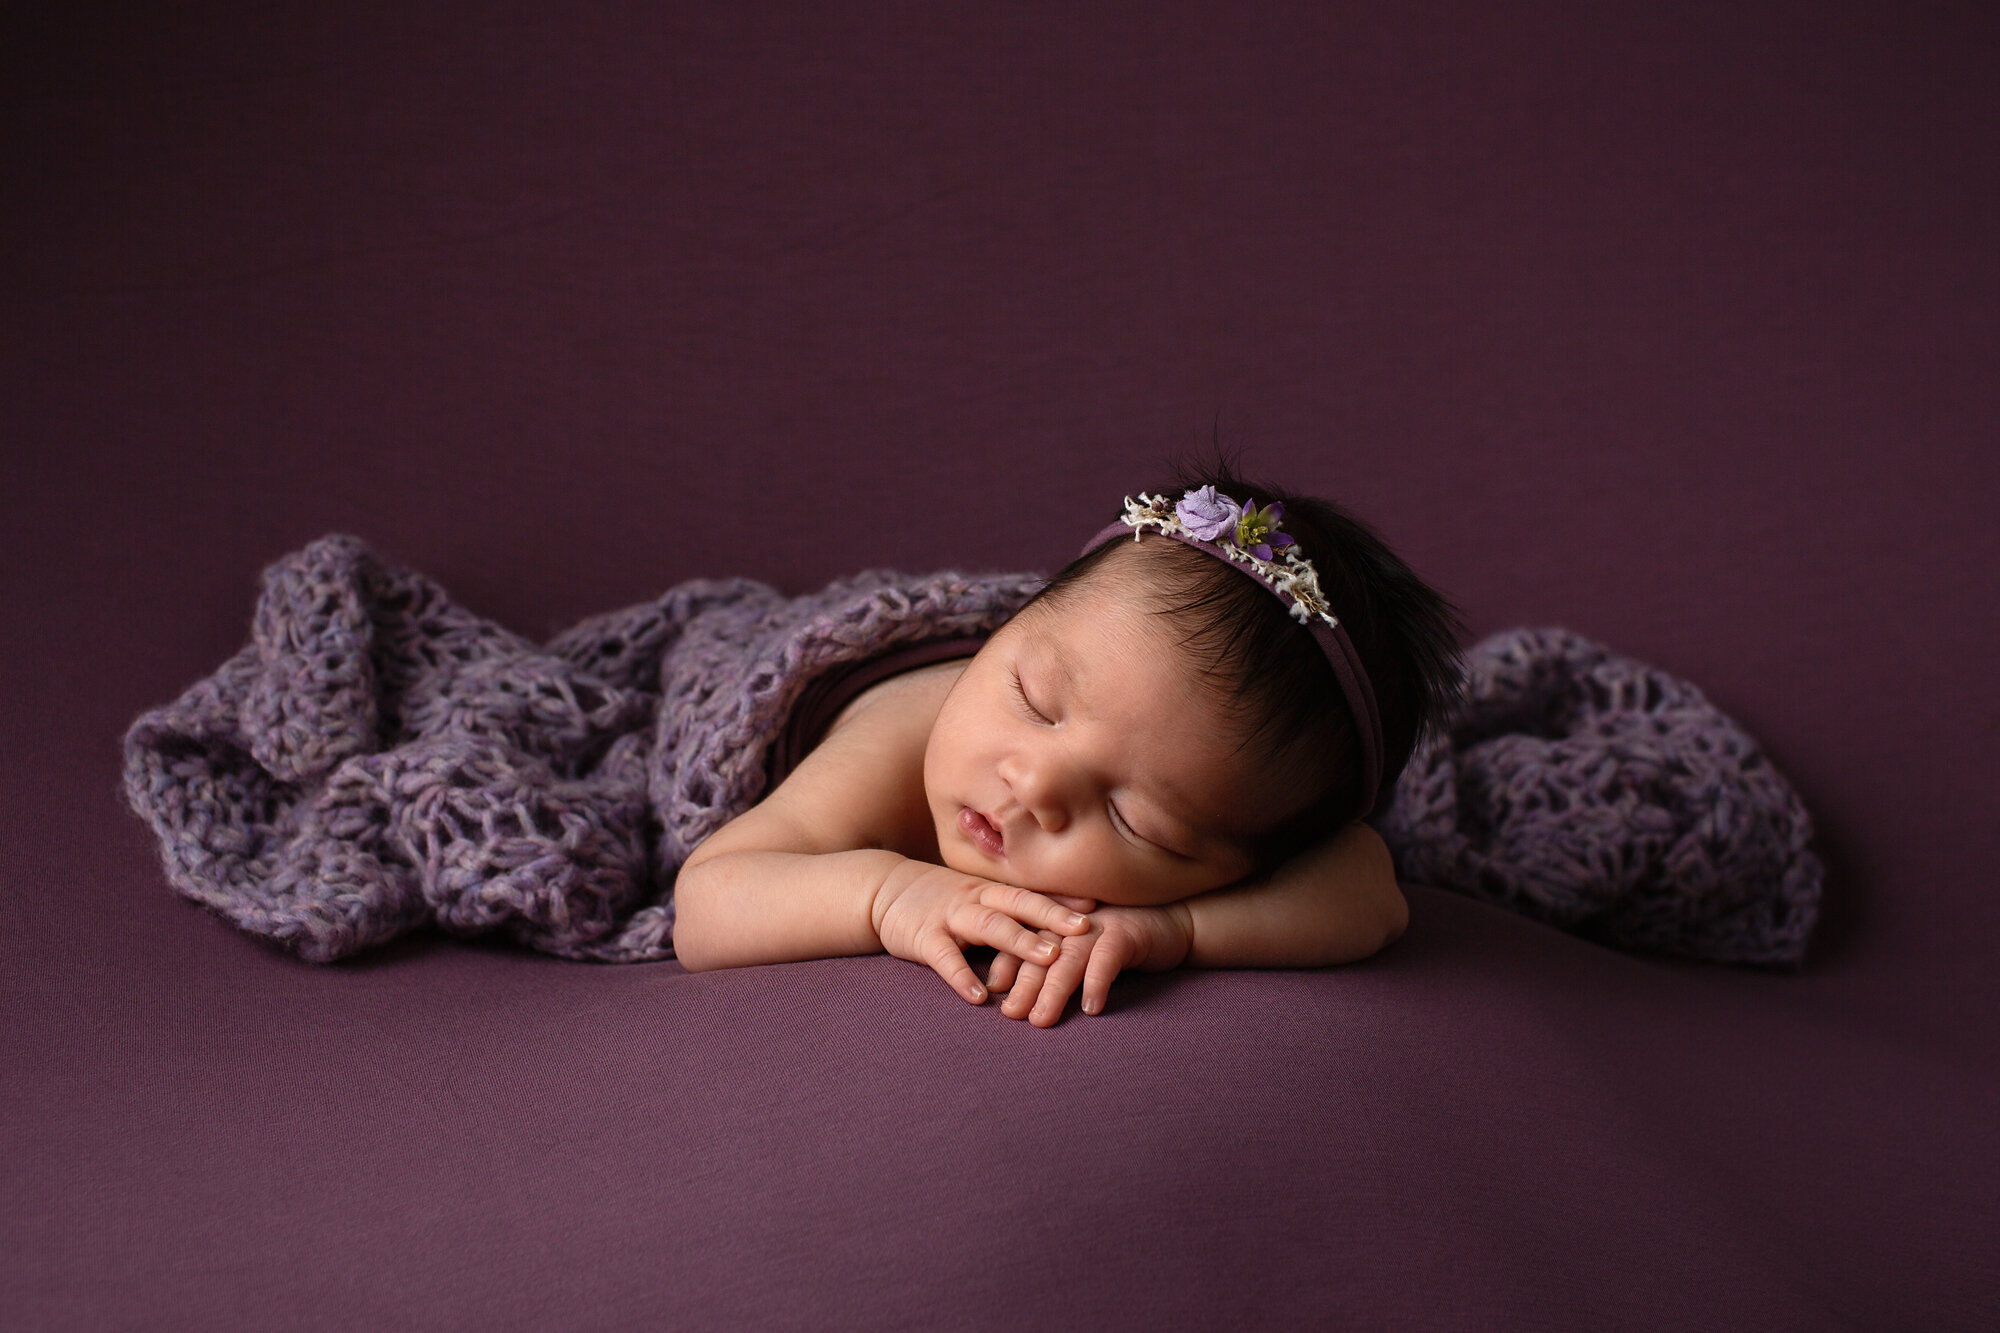 baby newborn photographer south wales caerphilly cardiff